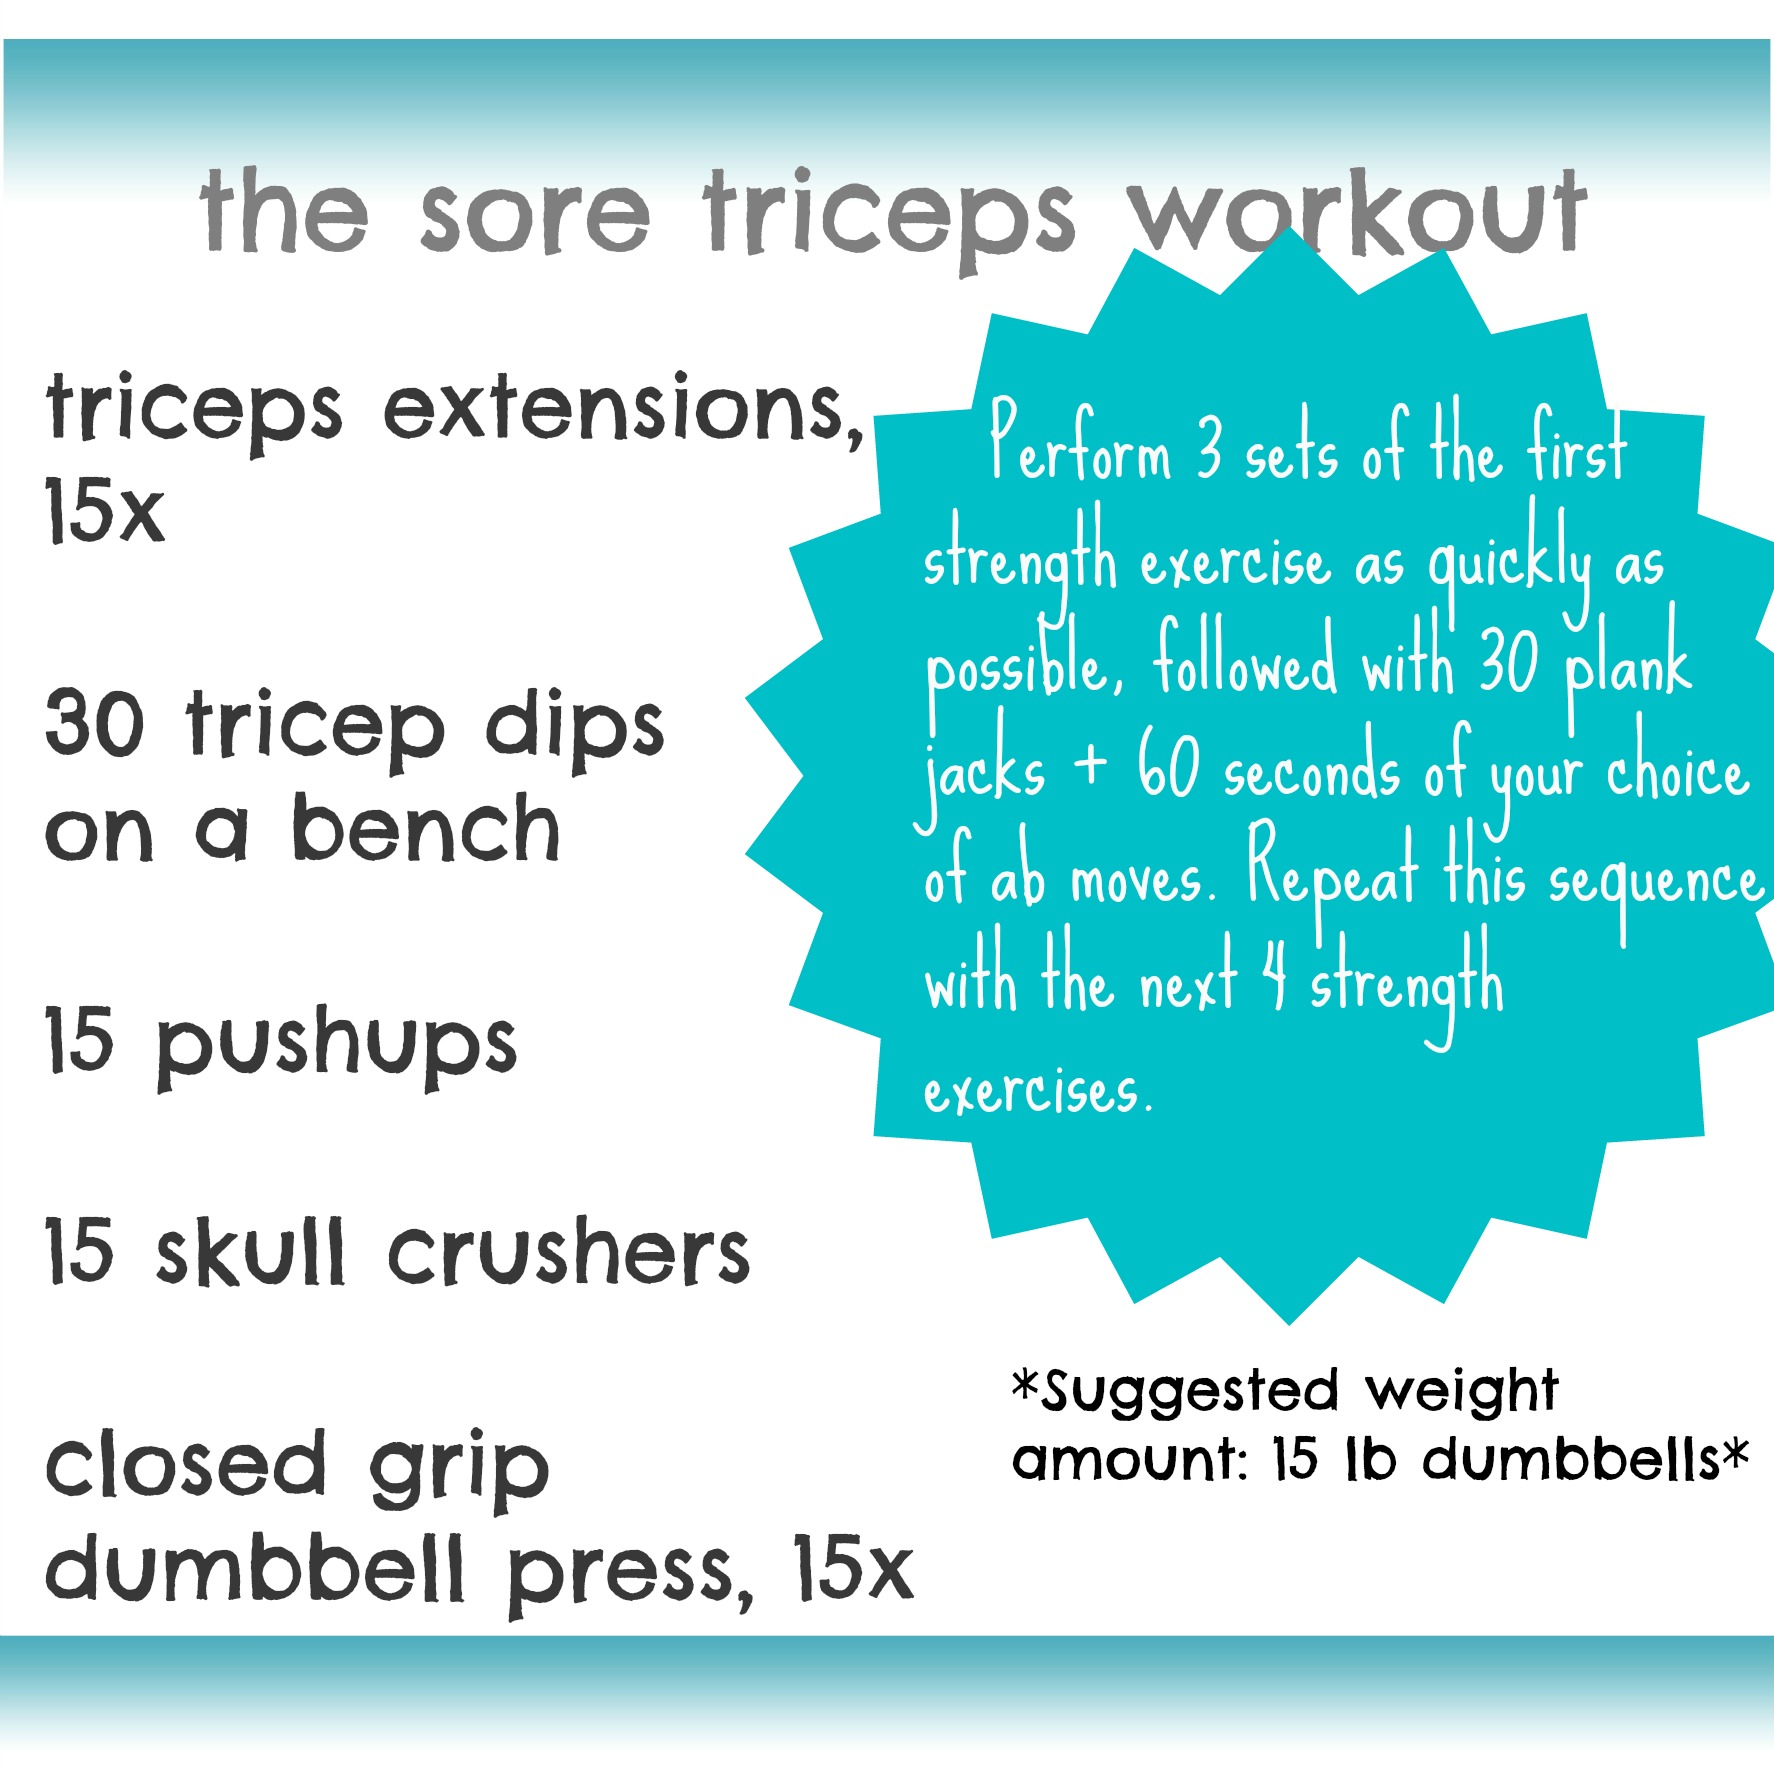 Printable Tricep Exercise Chart